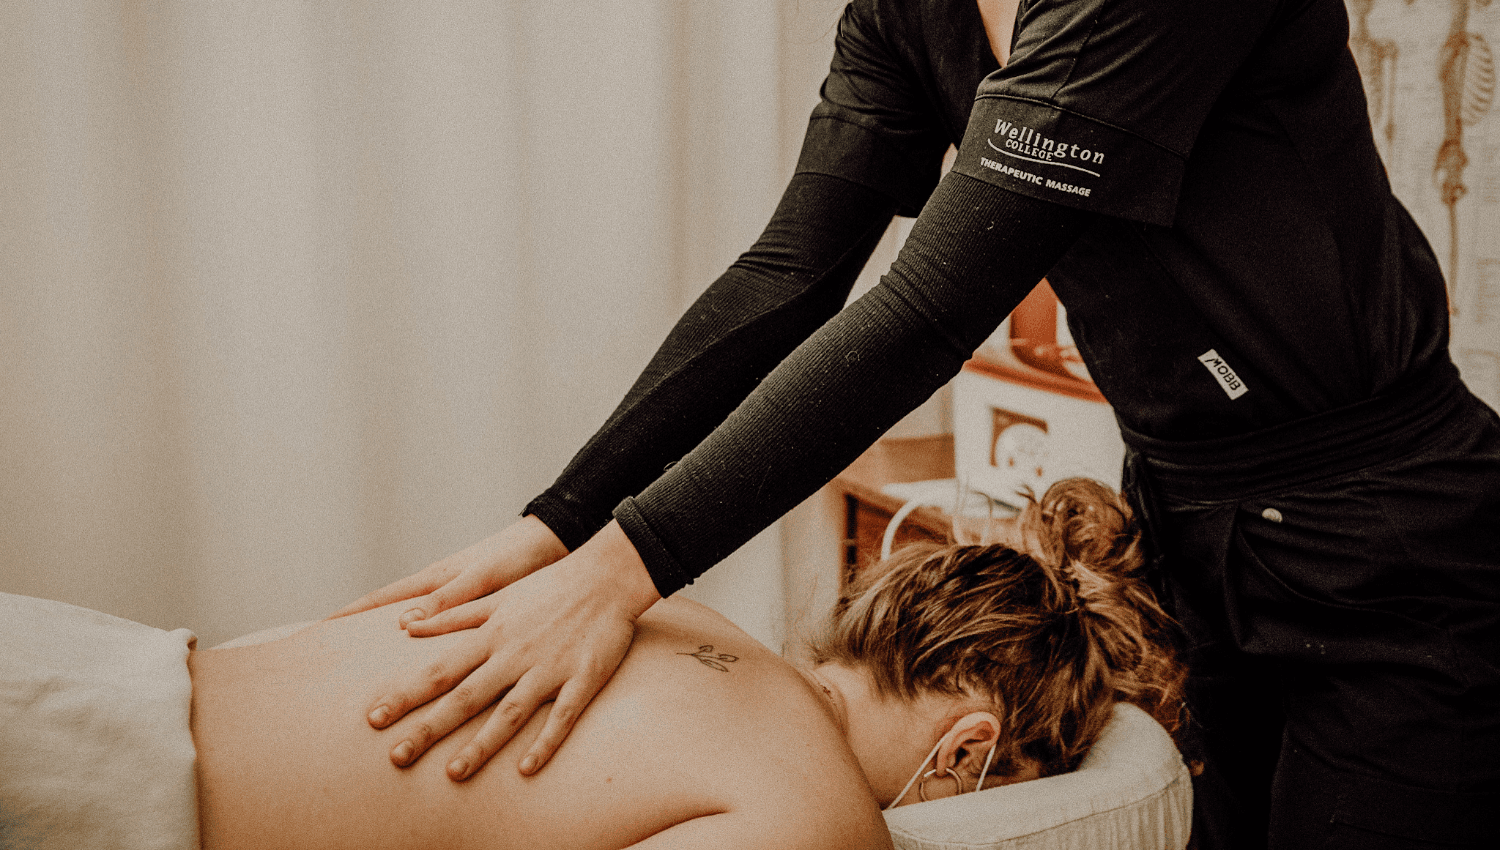 Image for Massage Therapy